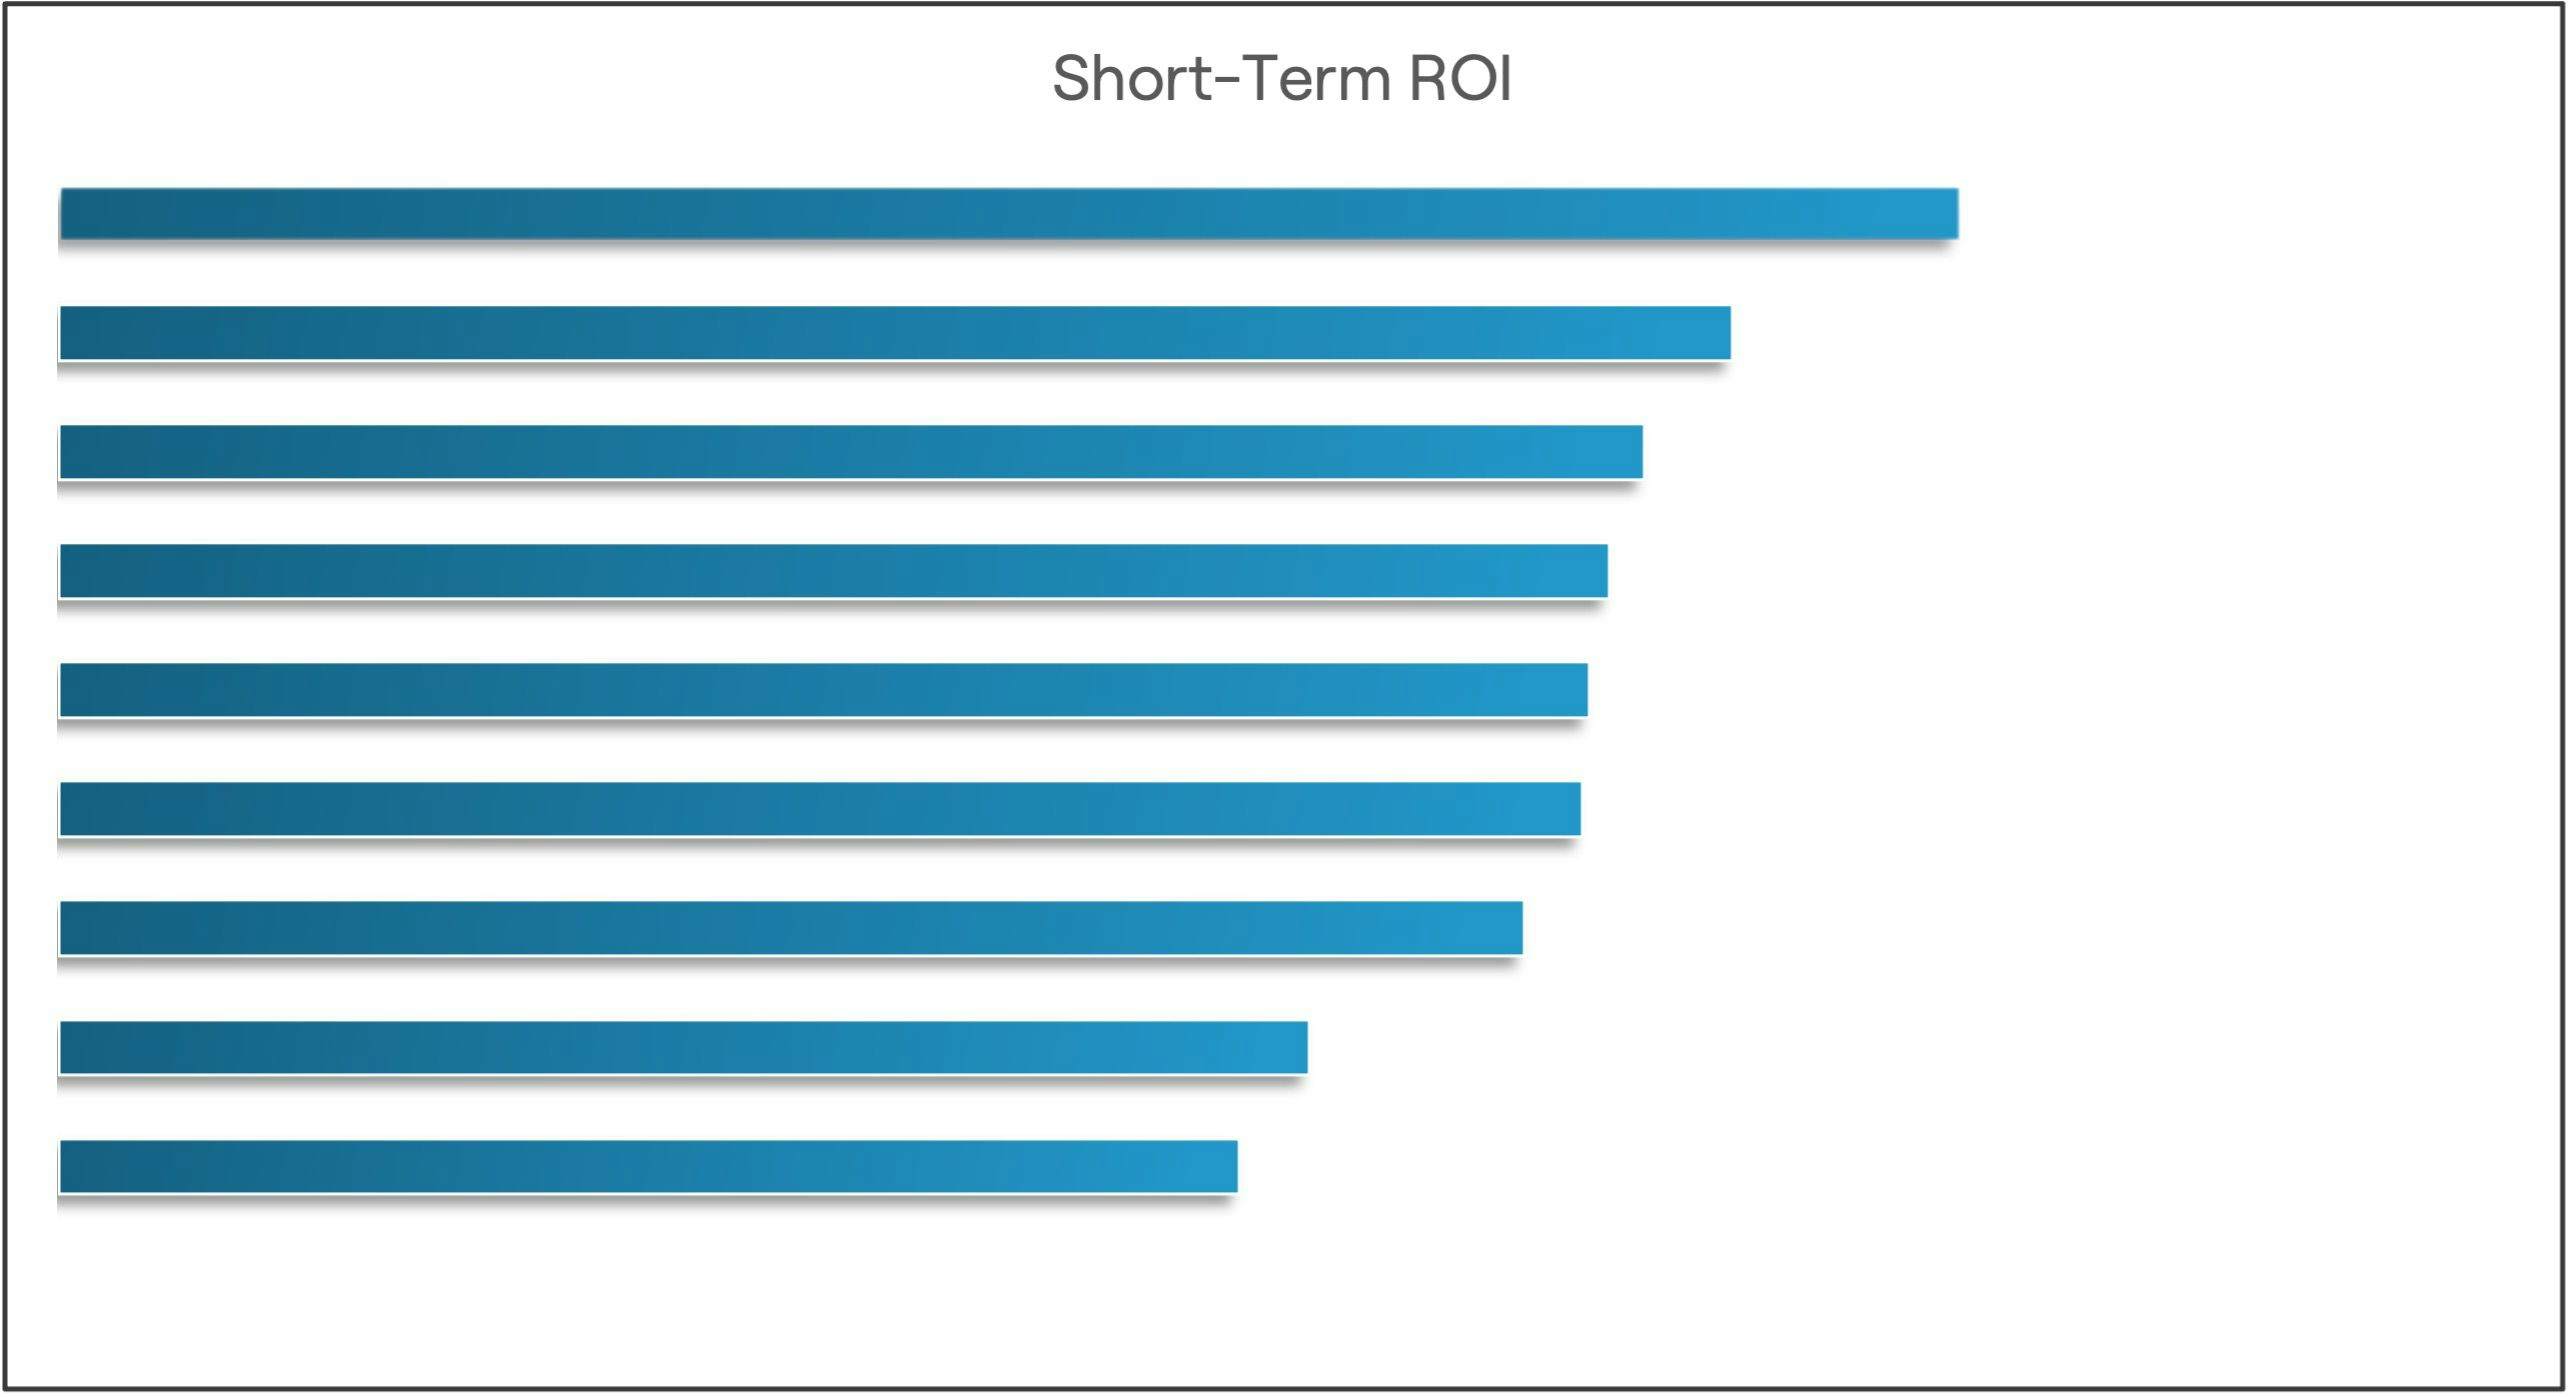 Media ROI results from Short-Term Marketing Mix Modeling